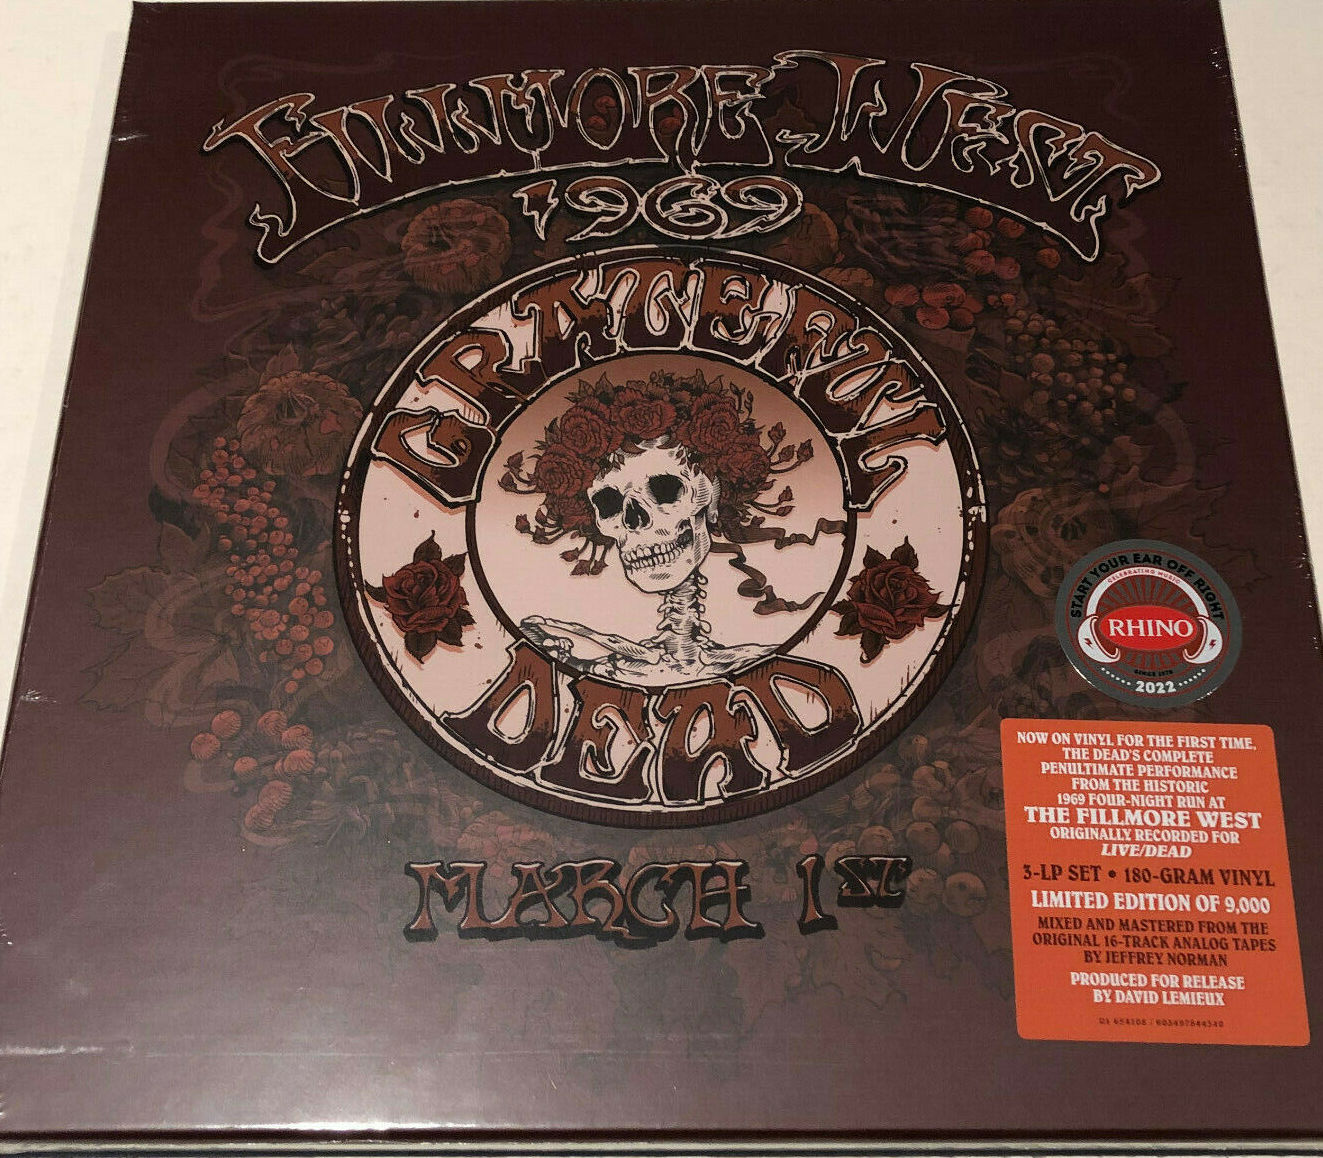 The Story of the Grateful Dead 2nd Edition - Vinyl Me, Please